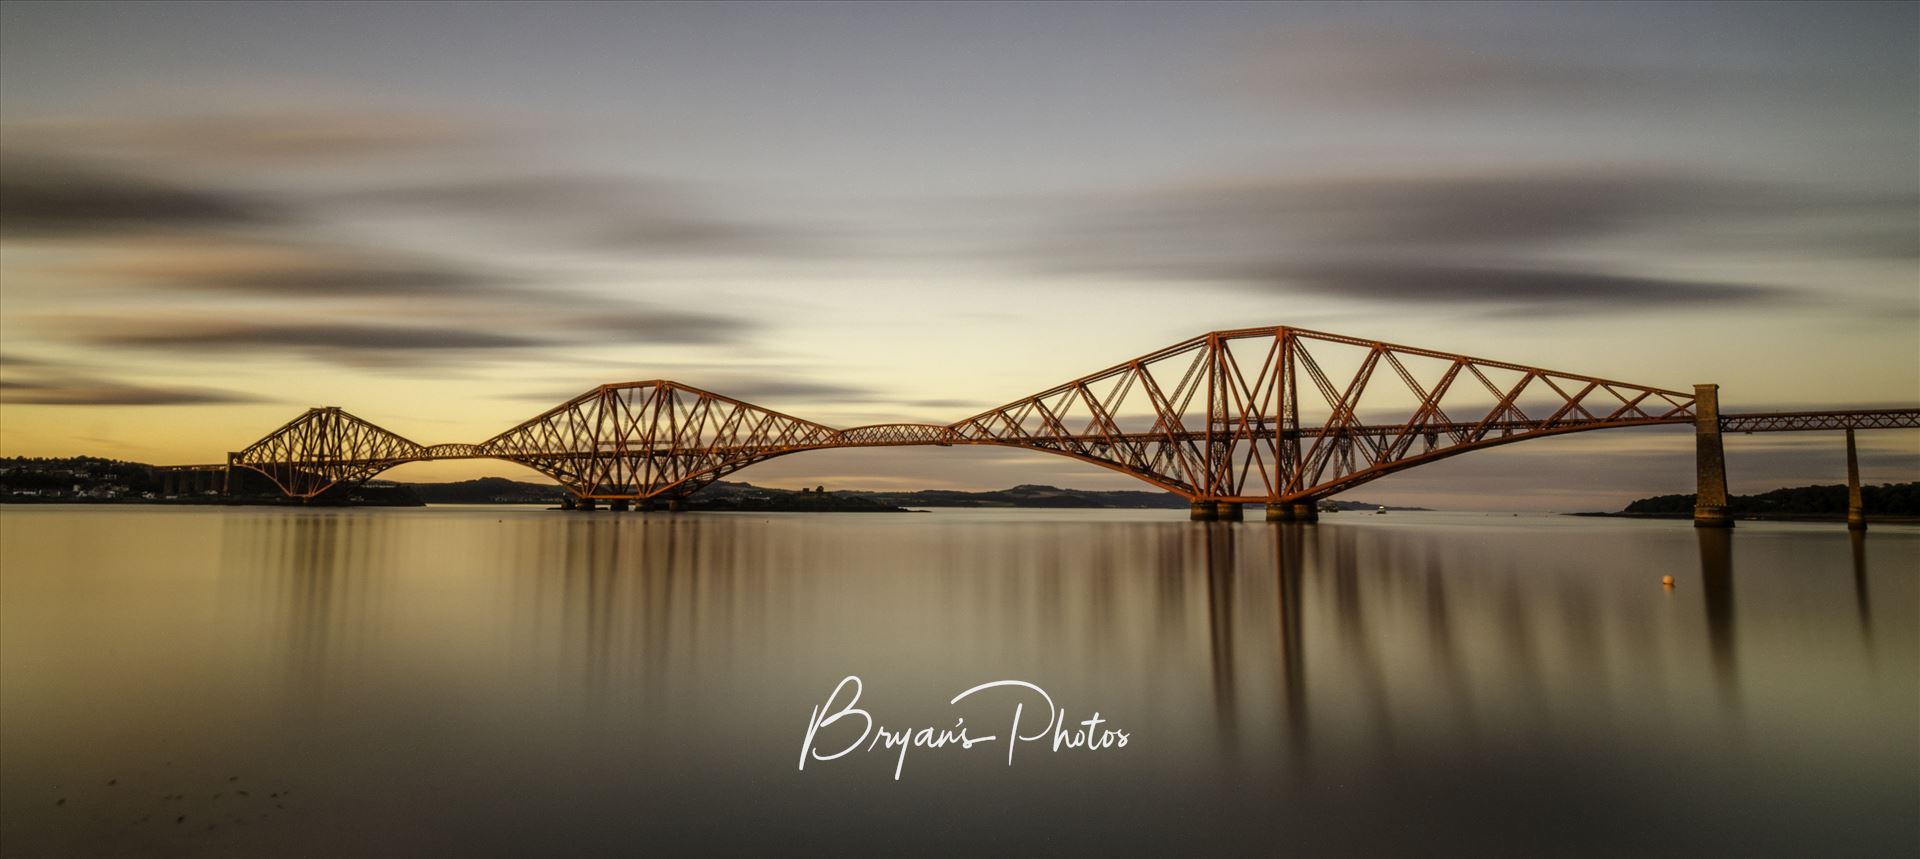 The Bridge at Sunset Panorama A panoramic long exposure photograph of the Forth Rail Bridge taken at sunset from South Queensferry. by Bryans Photos